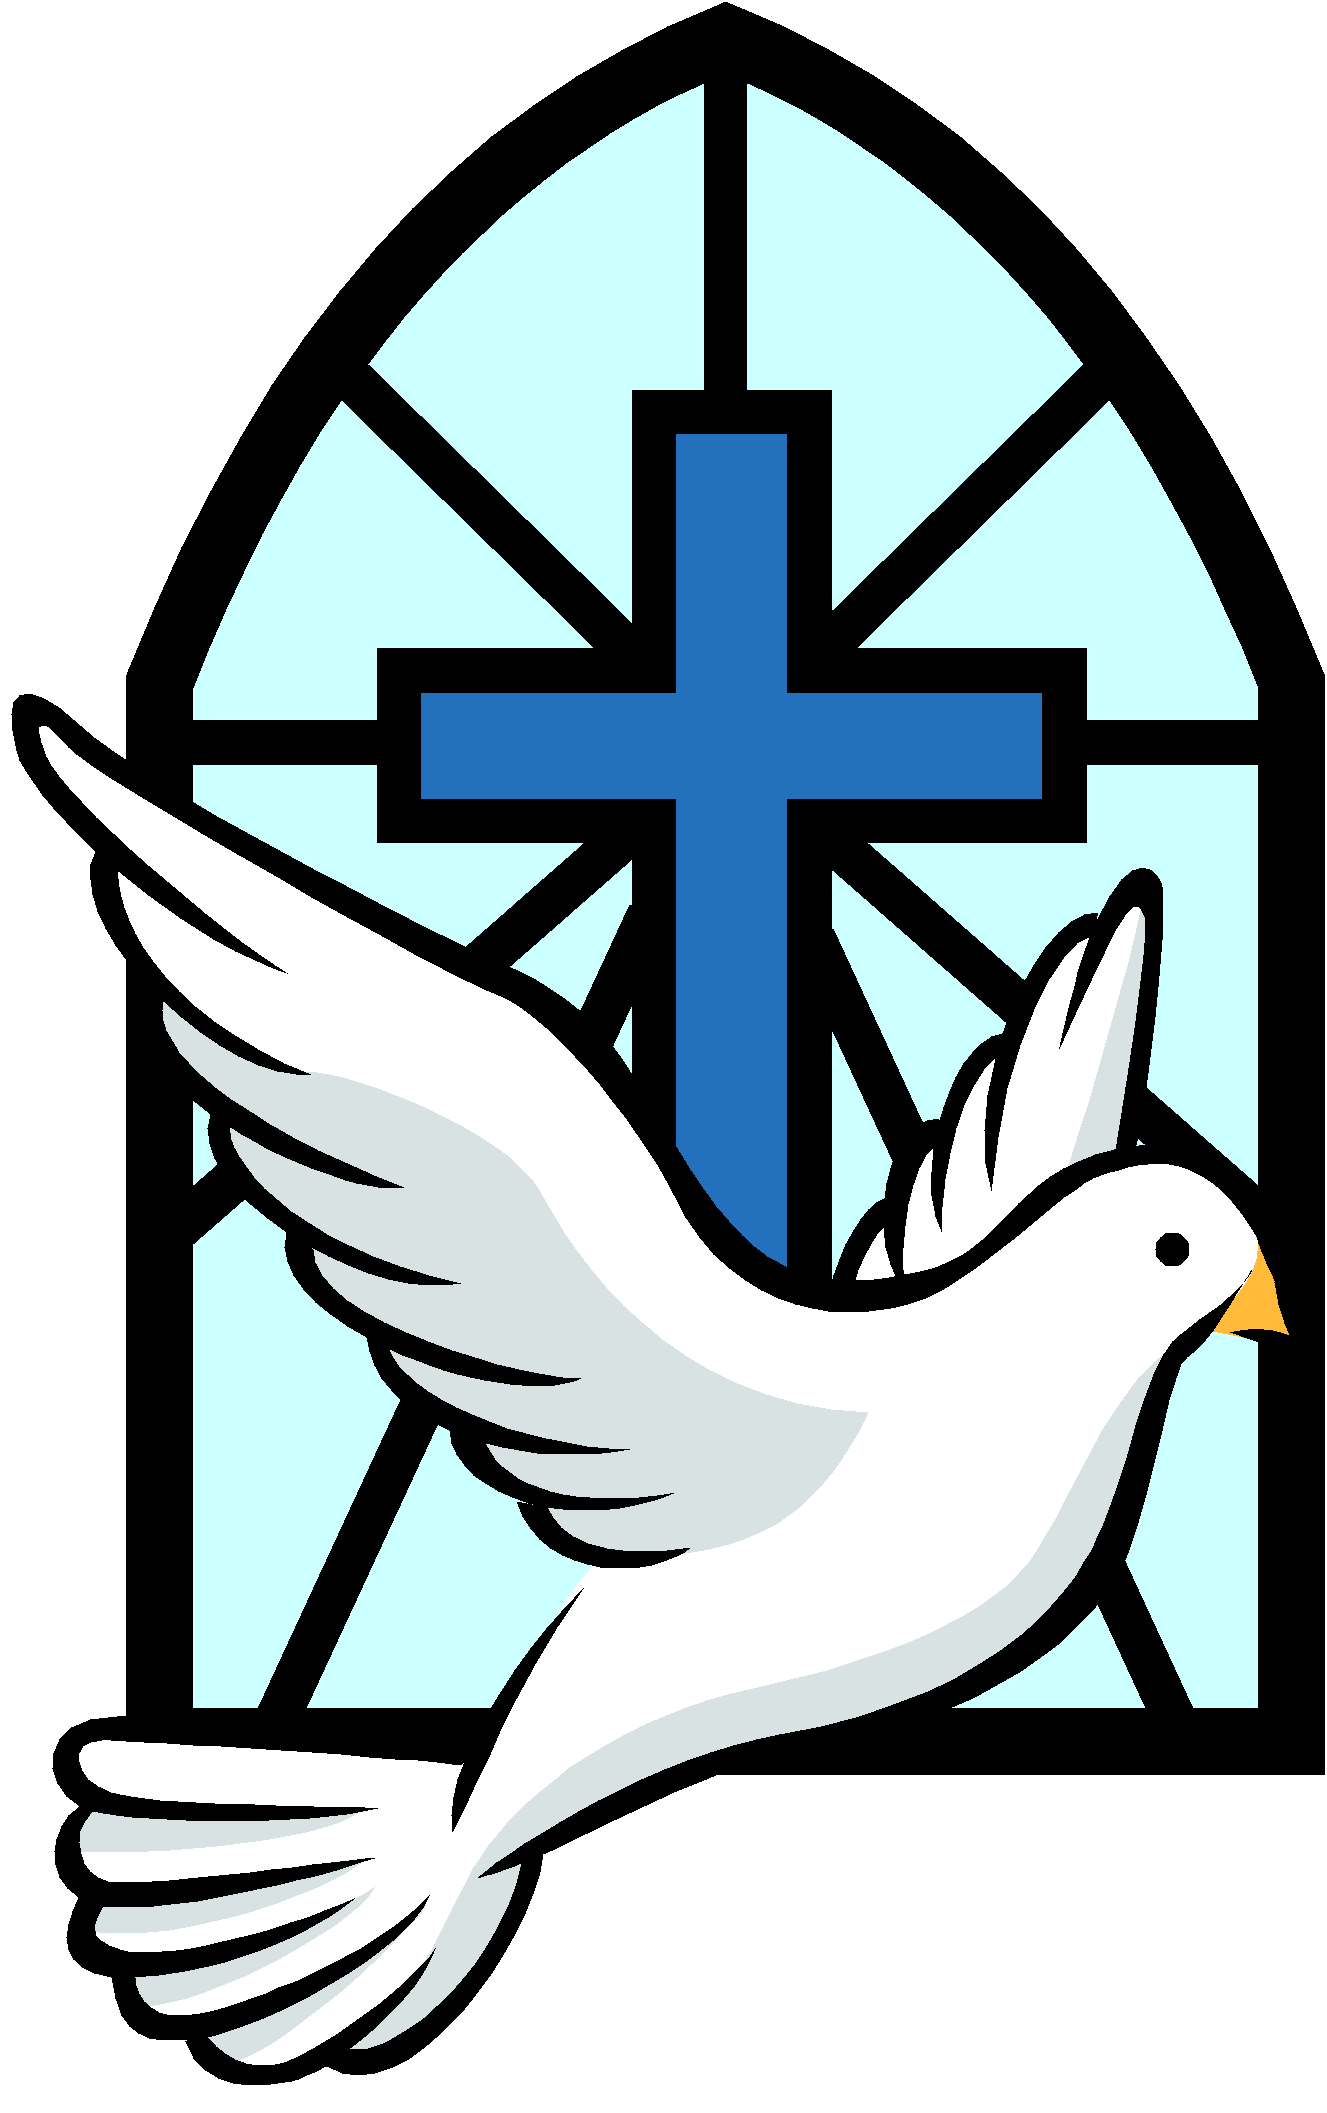 Pigeon clipart holy spirit. Confirmation explores hope and